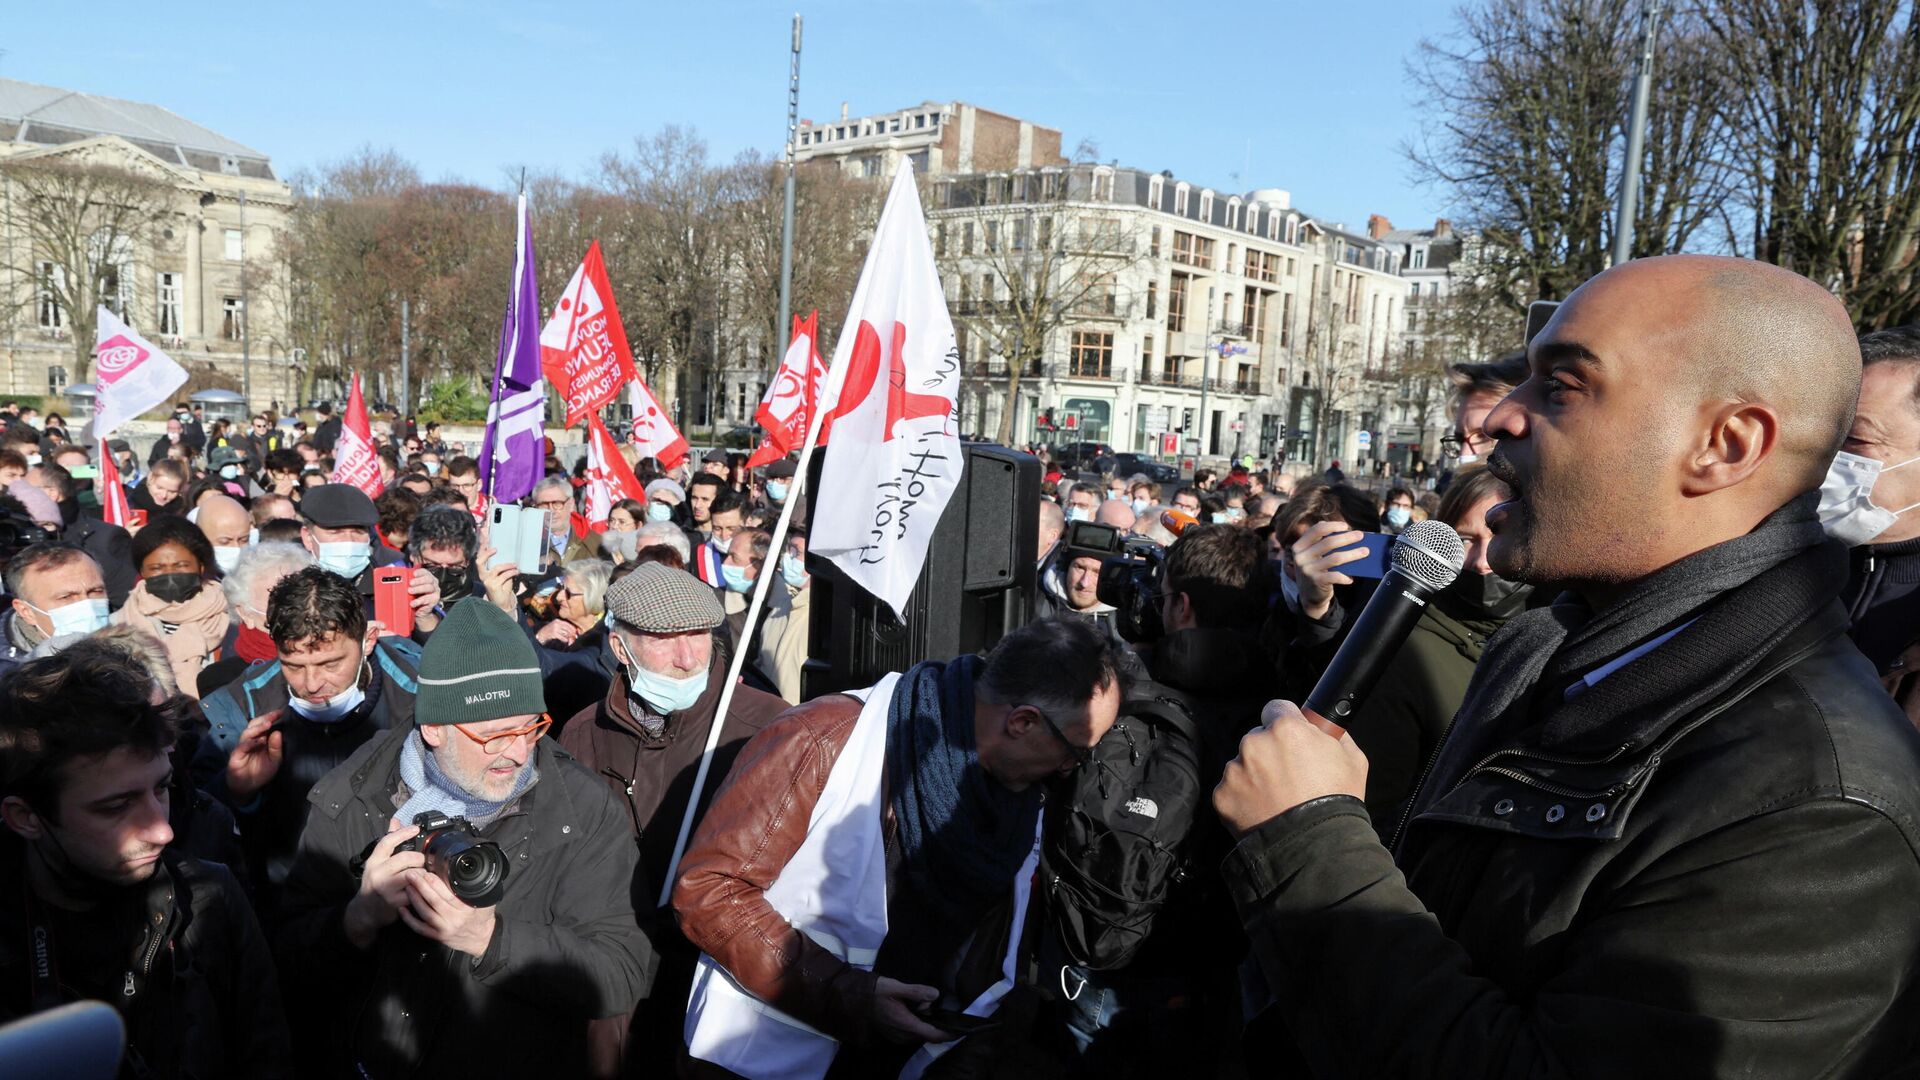 A protest against French presidential candidate Eric Zemmour, Lille, France, 5 February 2022 - Sputnik International, 1920, 05.02.2022